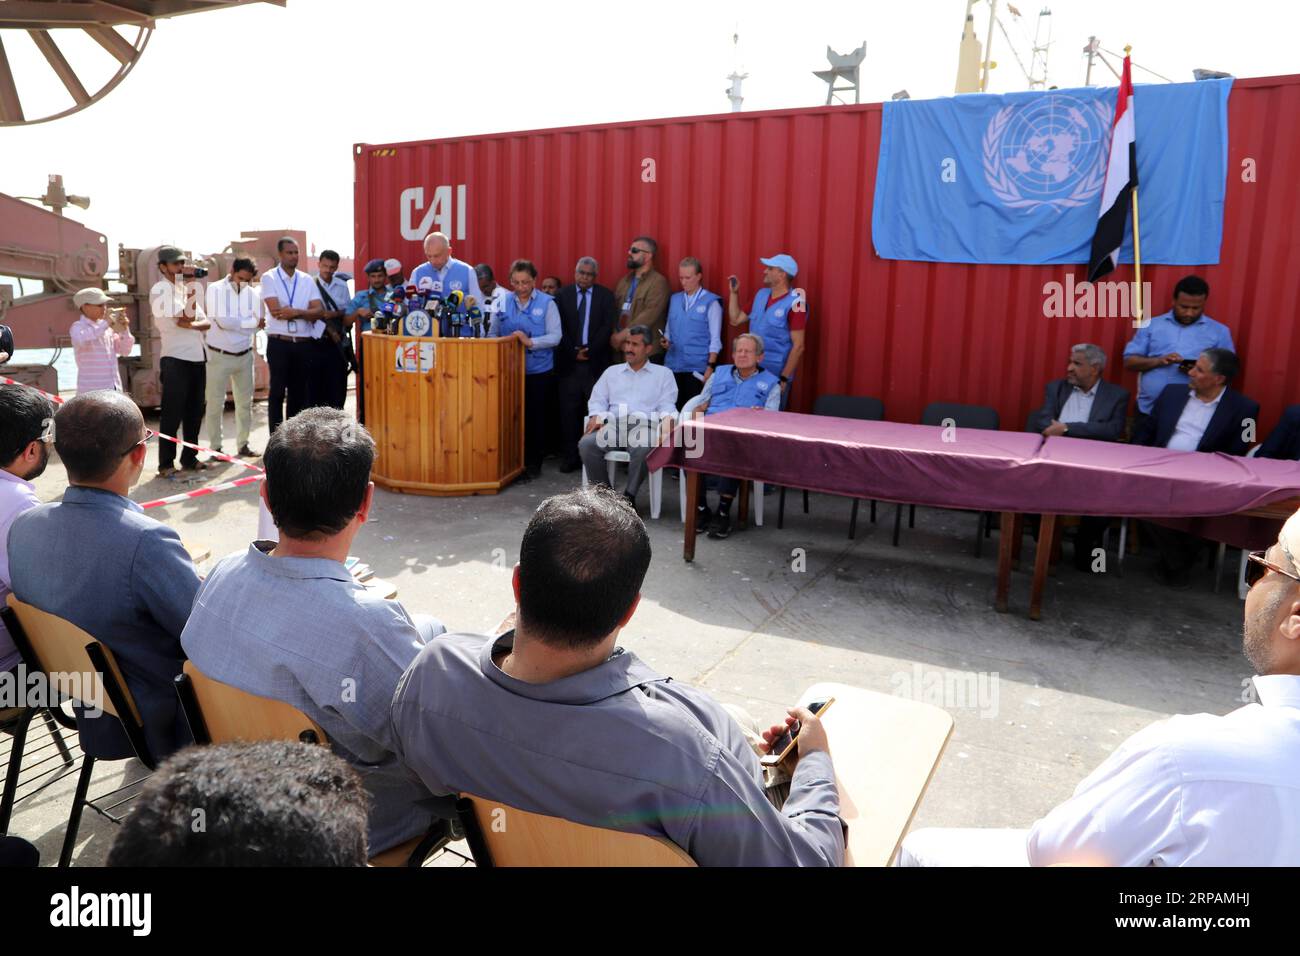 (190515) -- HODEIDAH, May 15, 2019 -- The Redeployment Coordination Committee holds a press conference at the Hodeidah port in Hodeidah, Yemen, on May 14, 2019. The UN monitoring mission in Yemen on Tuesday welcomed the Houthi rebels handover of the security of Hodeidah ports to the coast guards. YEMEN-HODEIDAH-UN-PRESS CONFERENCE nieyunpeng PUBLICATIONxNOTxINxCHN Stock Photo